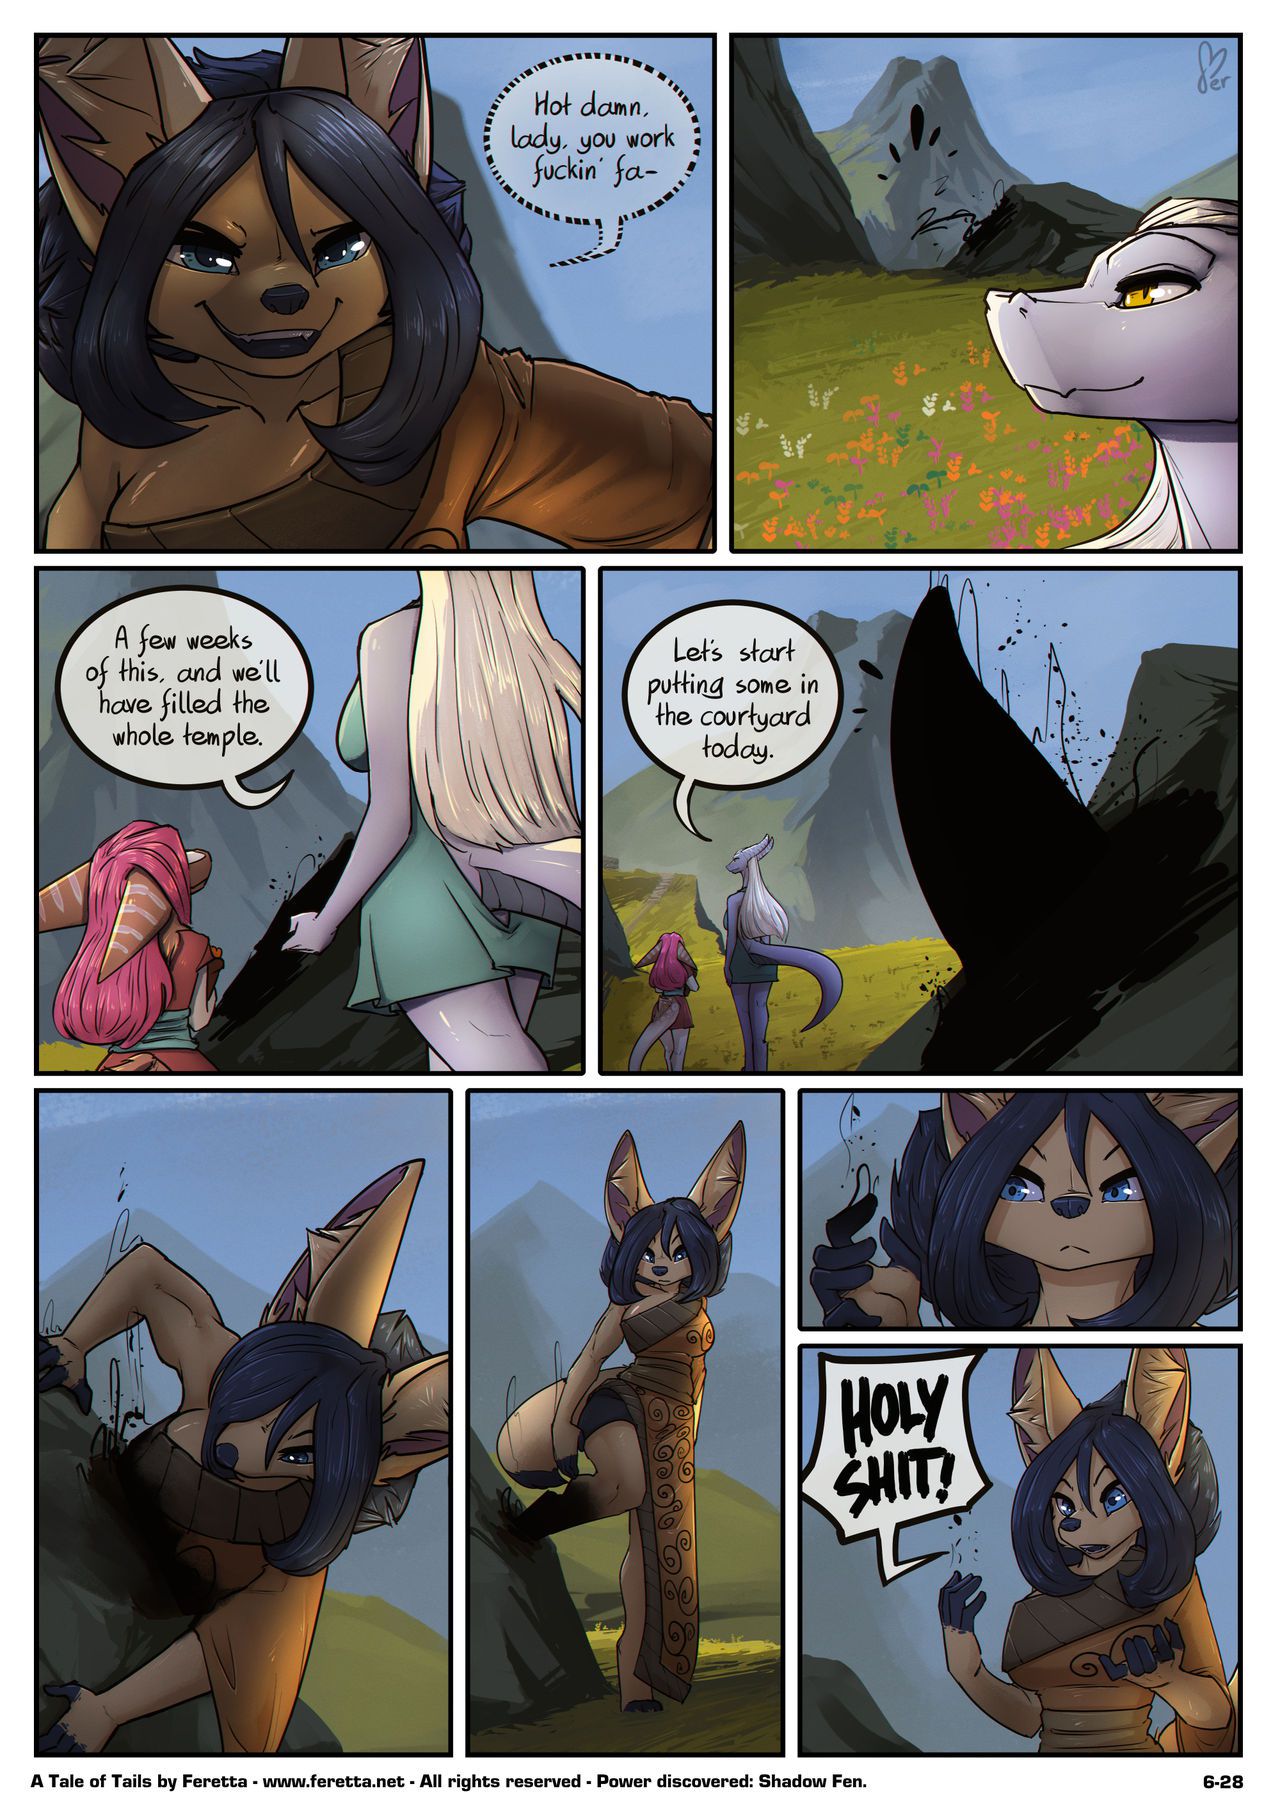 [Feretta] Farellian Legends: A Tale of Tails (w/Extras) [Ongoing] 323